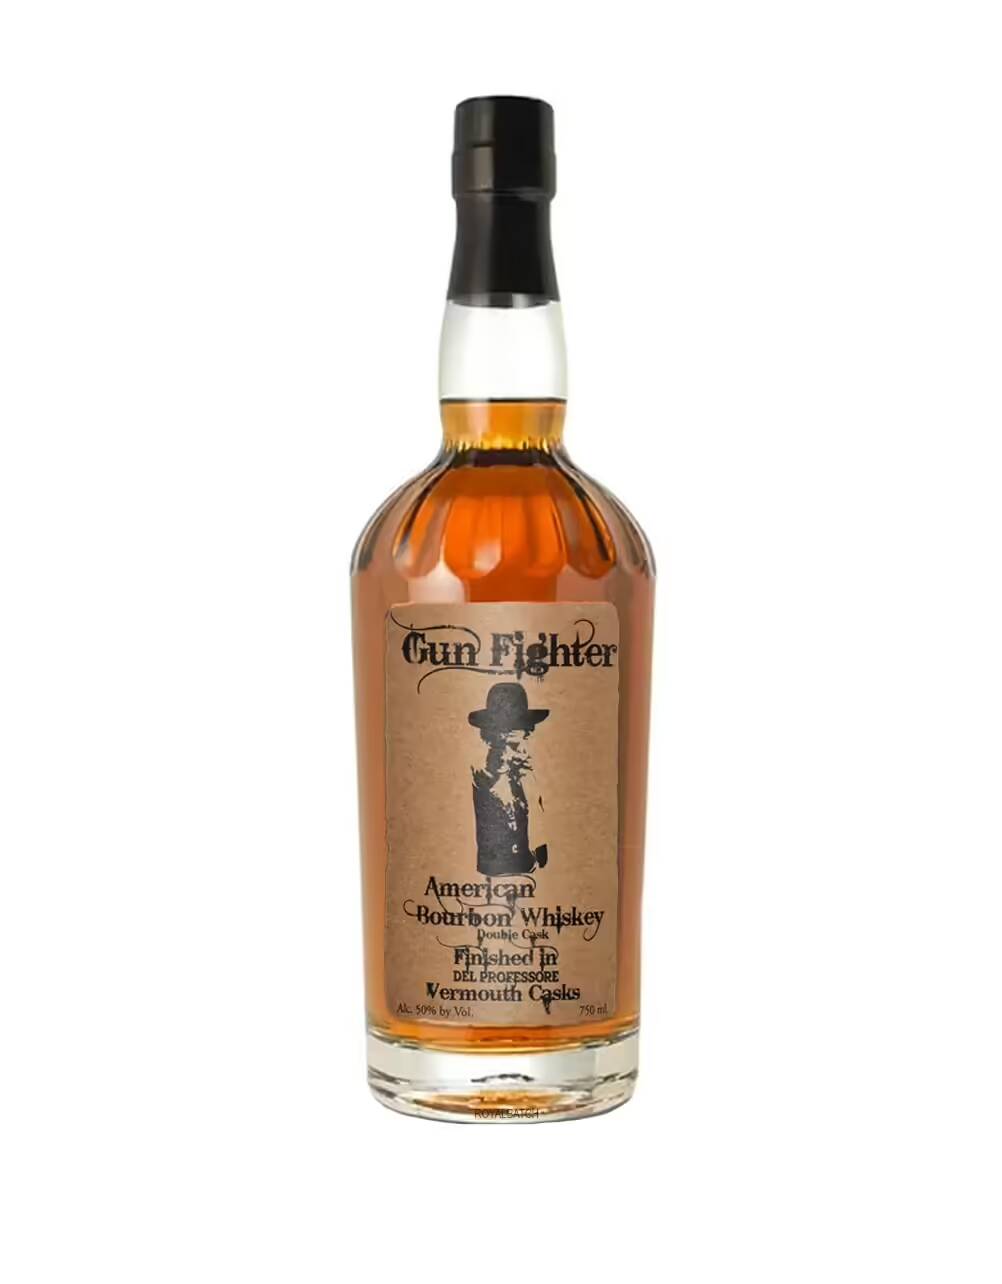 Gun Fighter Double Cask Finished In Del Professore Vermouth Casks Bourbon Whiskey 